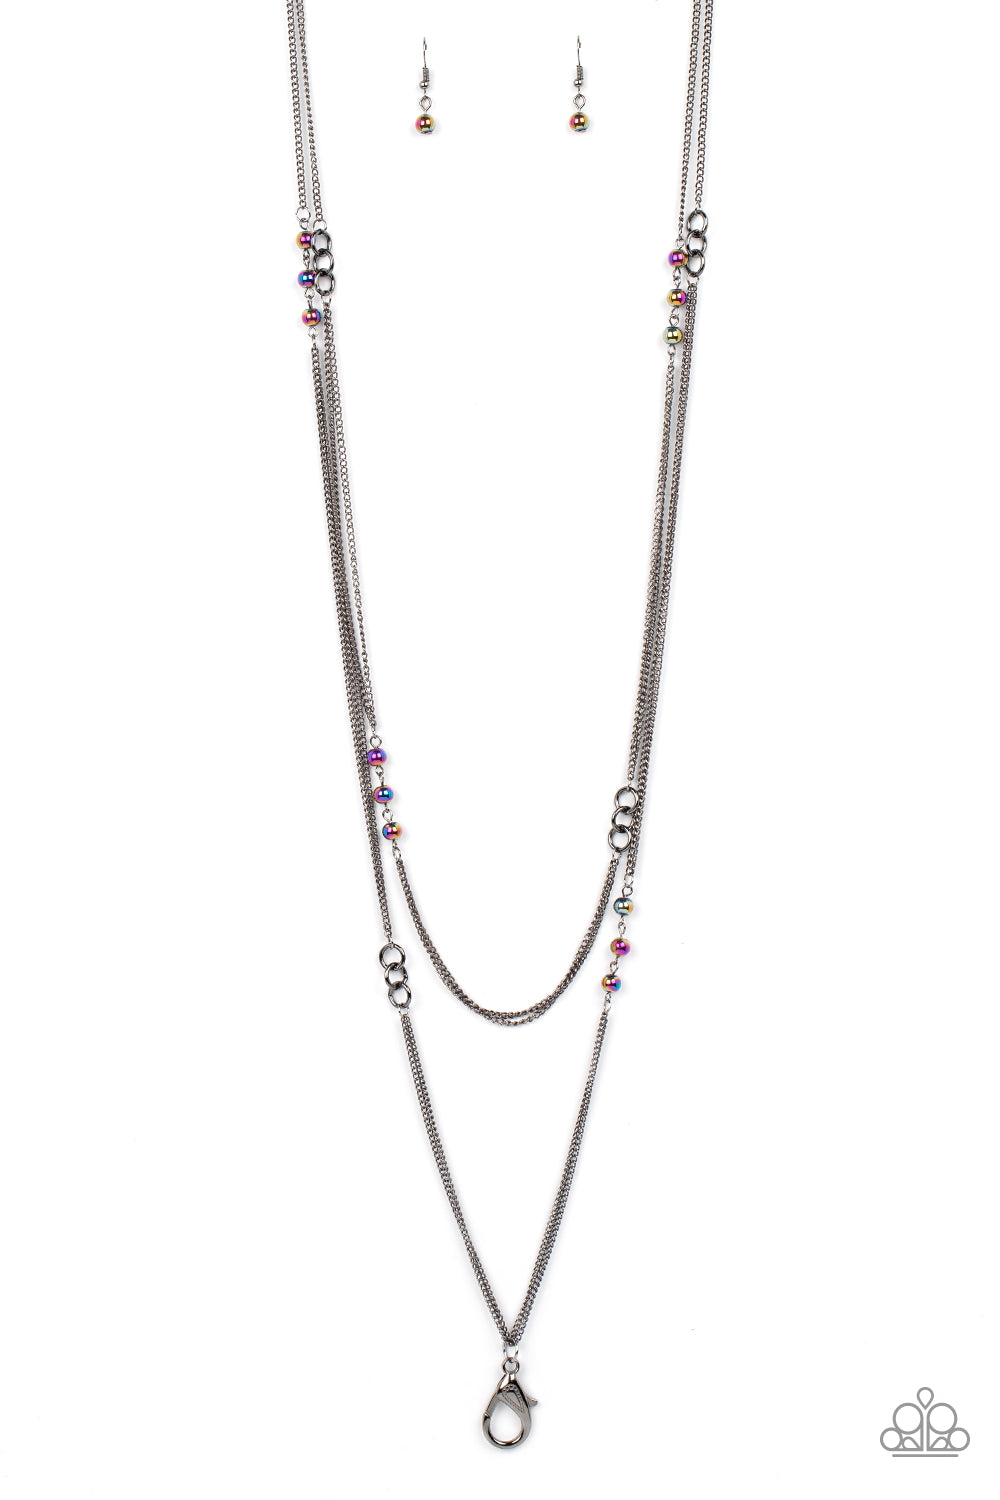 Ethereal Expectations Paparazzi Accessories Lanyard with Earrings Multi